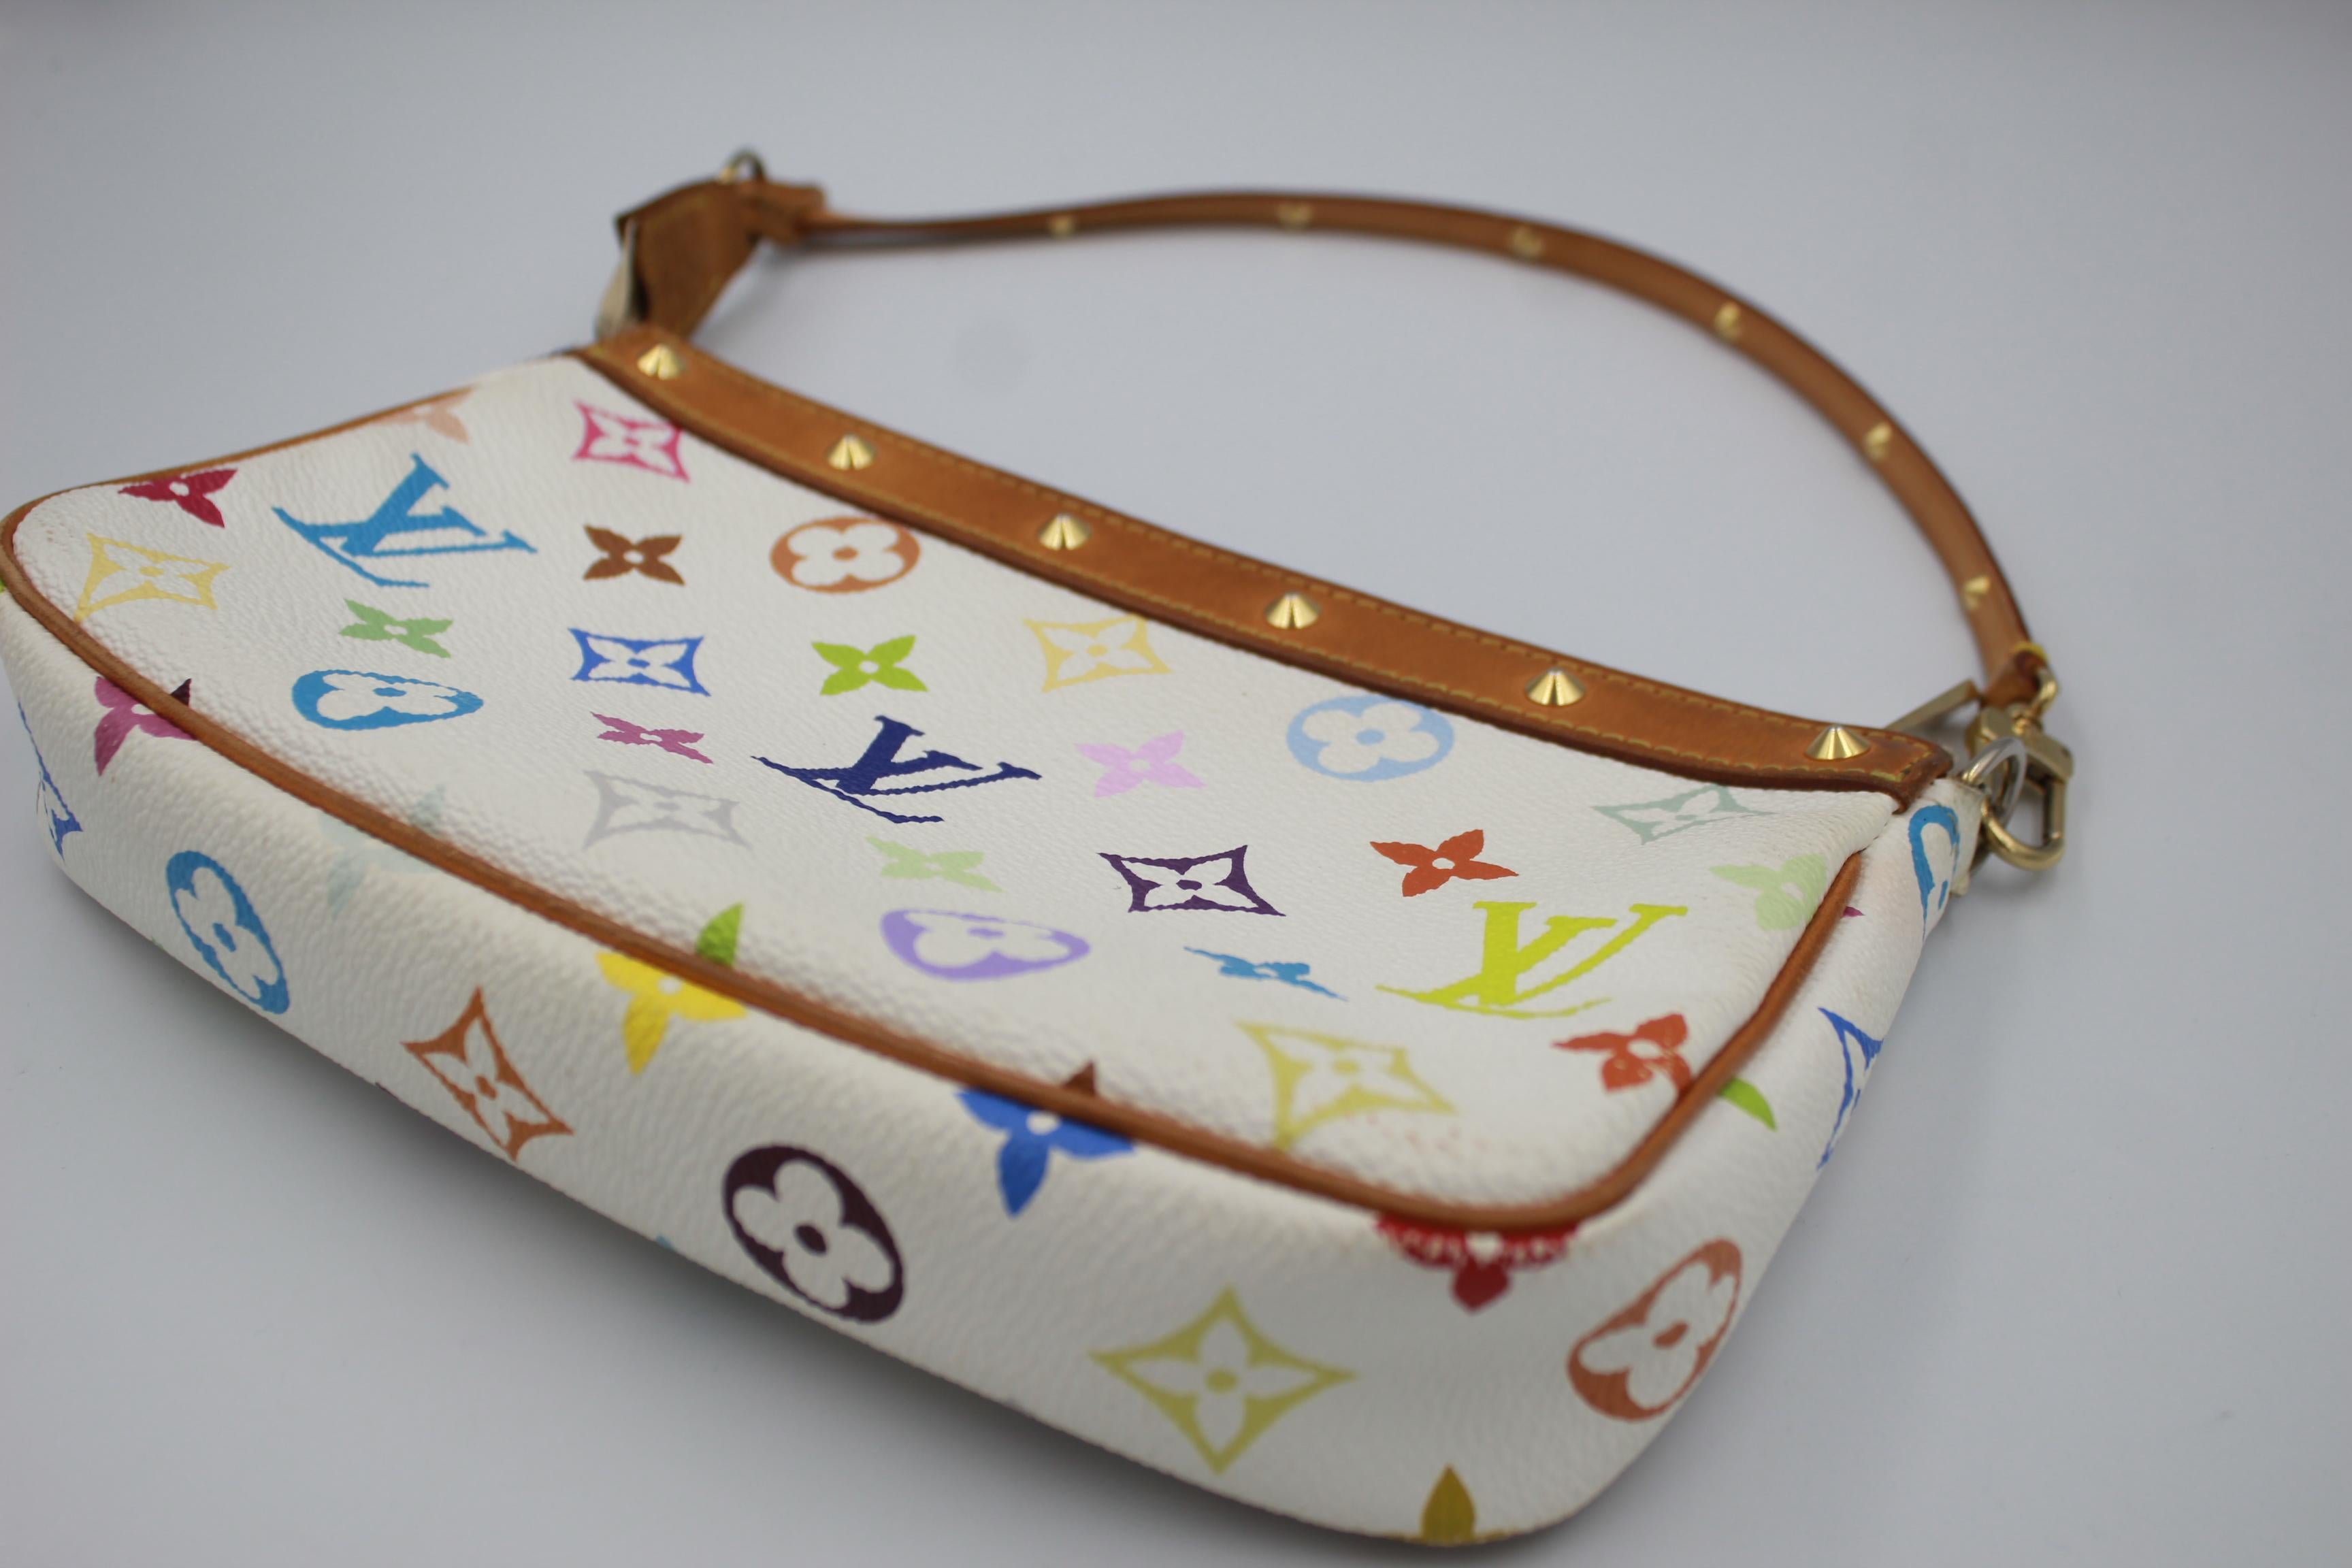 Lous Vuitton accessoire clutch in multicolours monogram by Takashi Murakami .
Limited edition by Takashi Murakami. 
Collection : 2004.
Good condition, with some light signs of wear :
( few spots of light decoloration at the corners and on the zipper